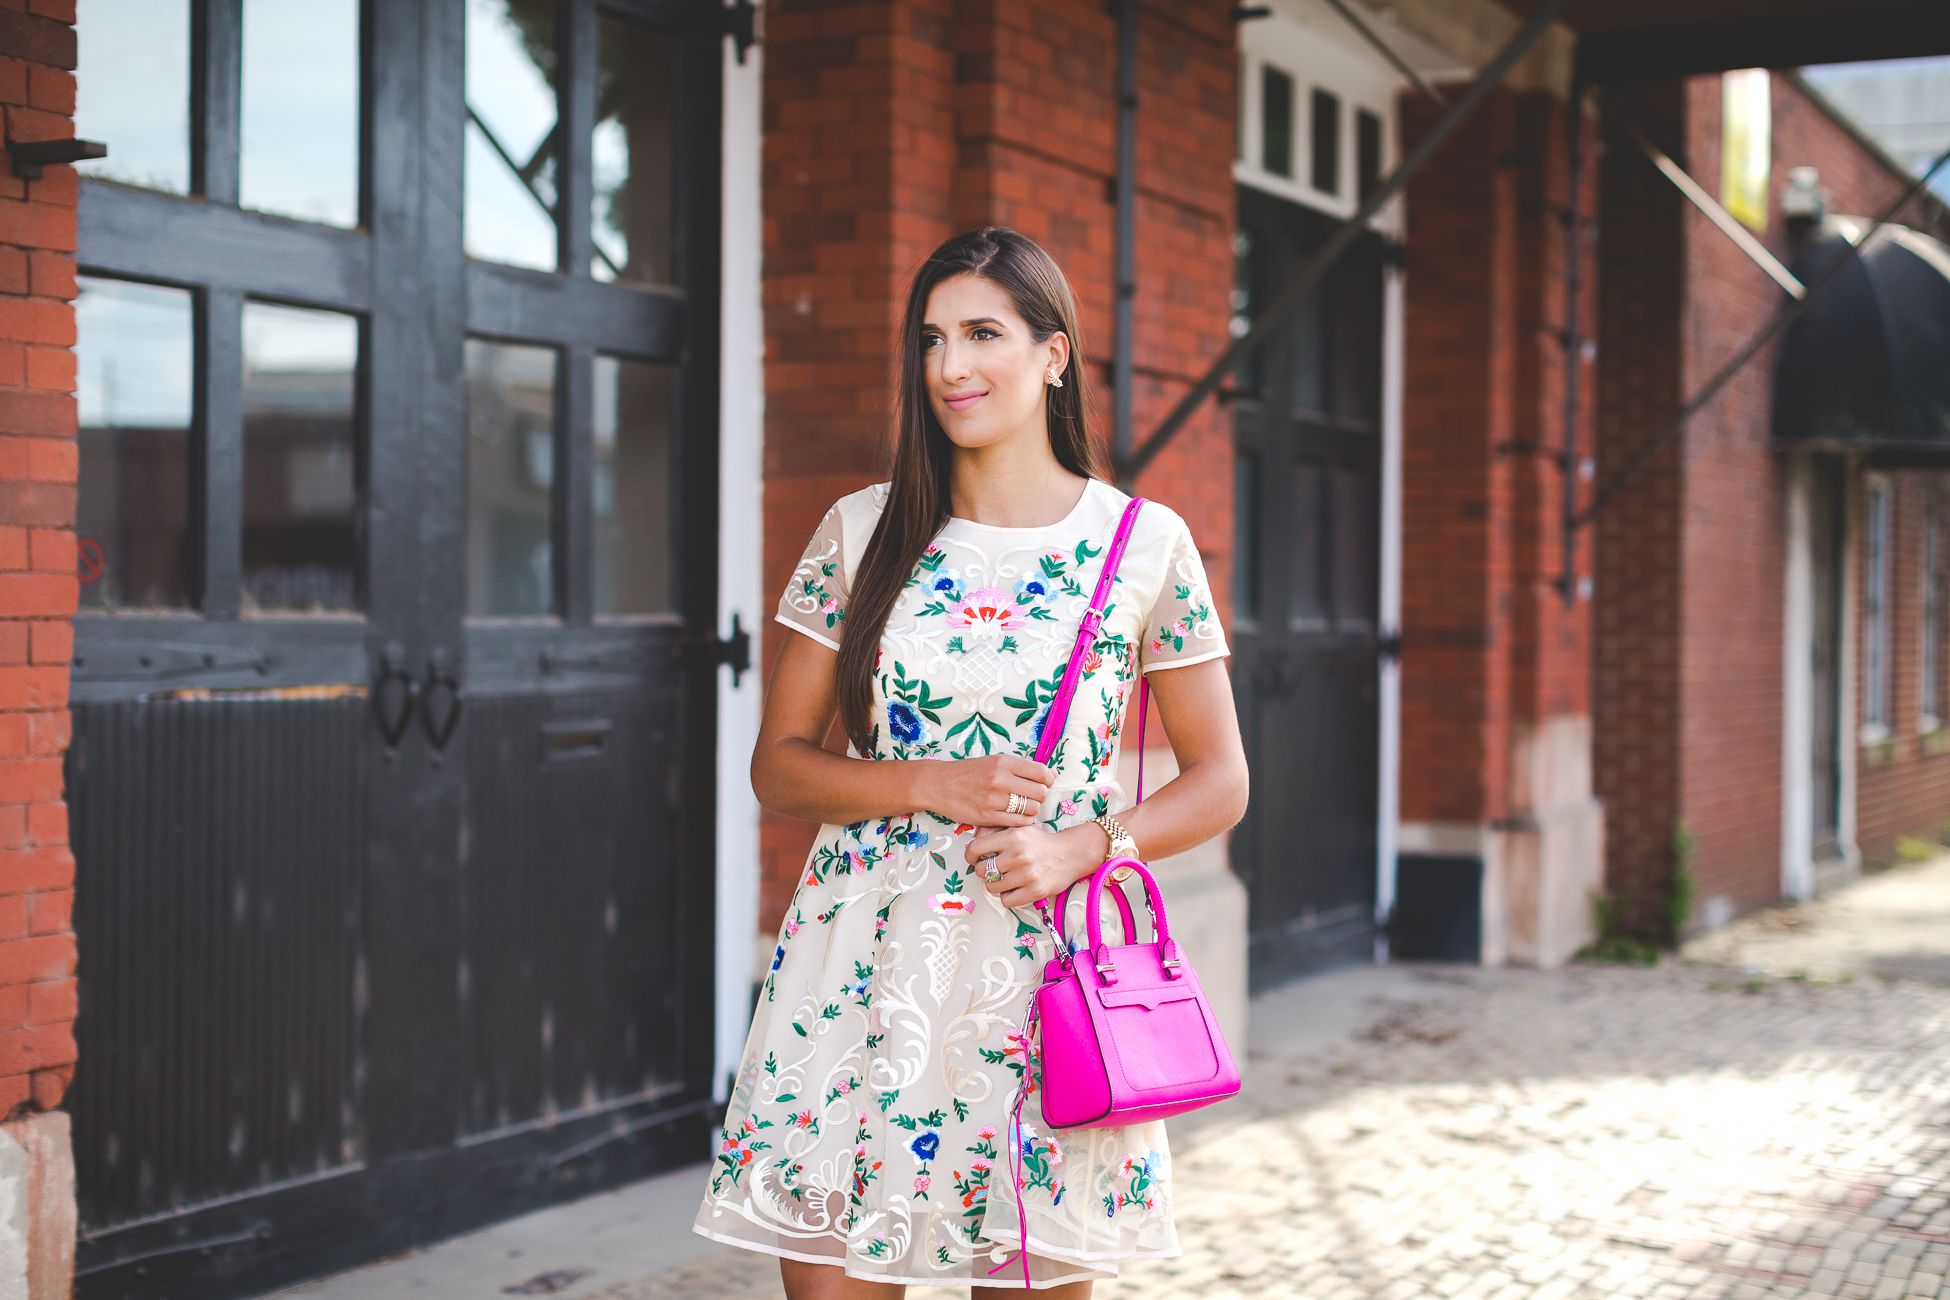 floral embroidered dress, floral organza dress, floral print dress, floral summer dress, chicwish dress, rebecca minkoff micro avery tote, bright embroidered dress // grace wainwright a southern drawl